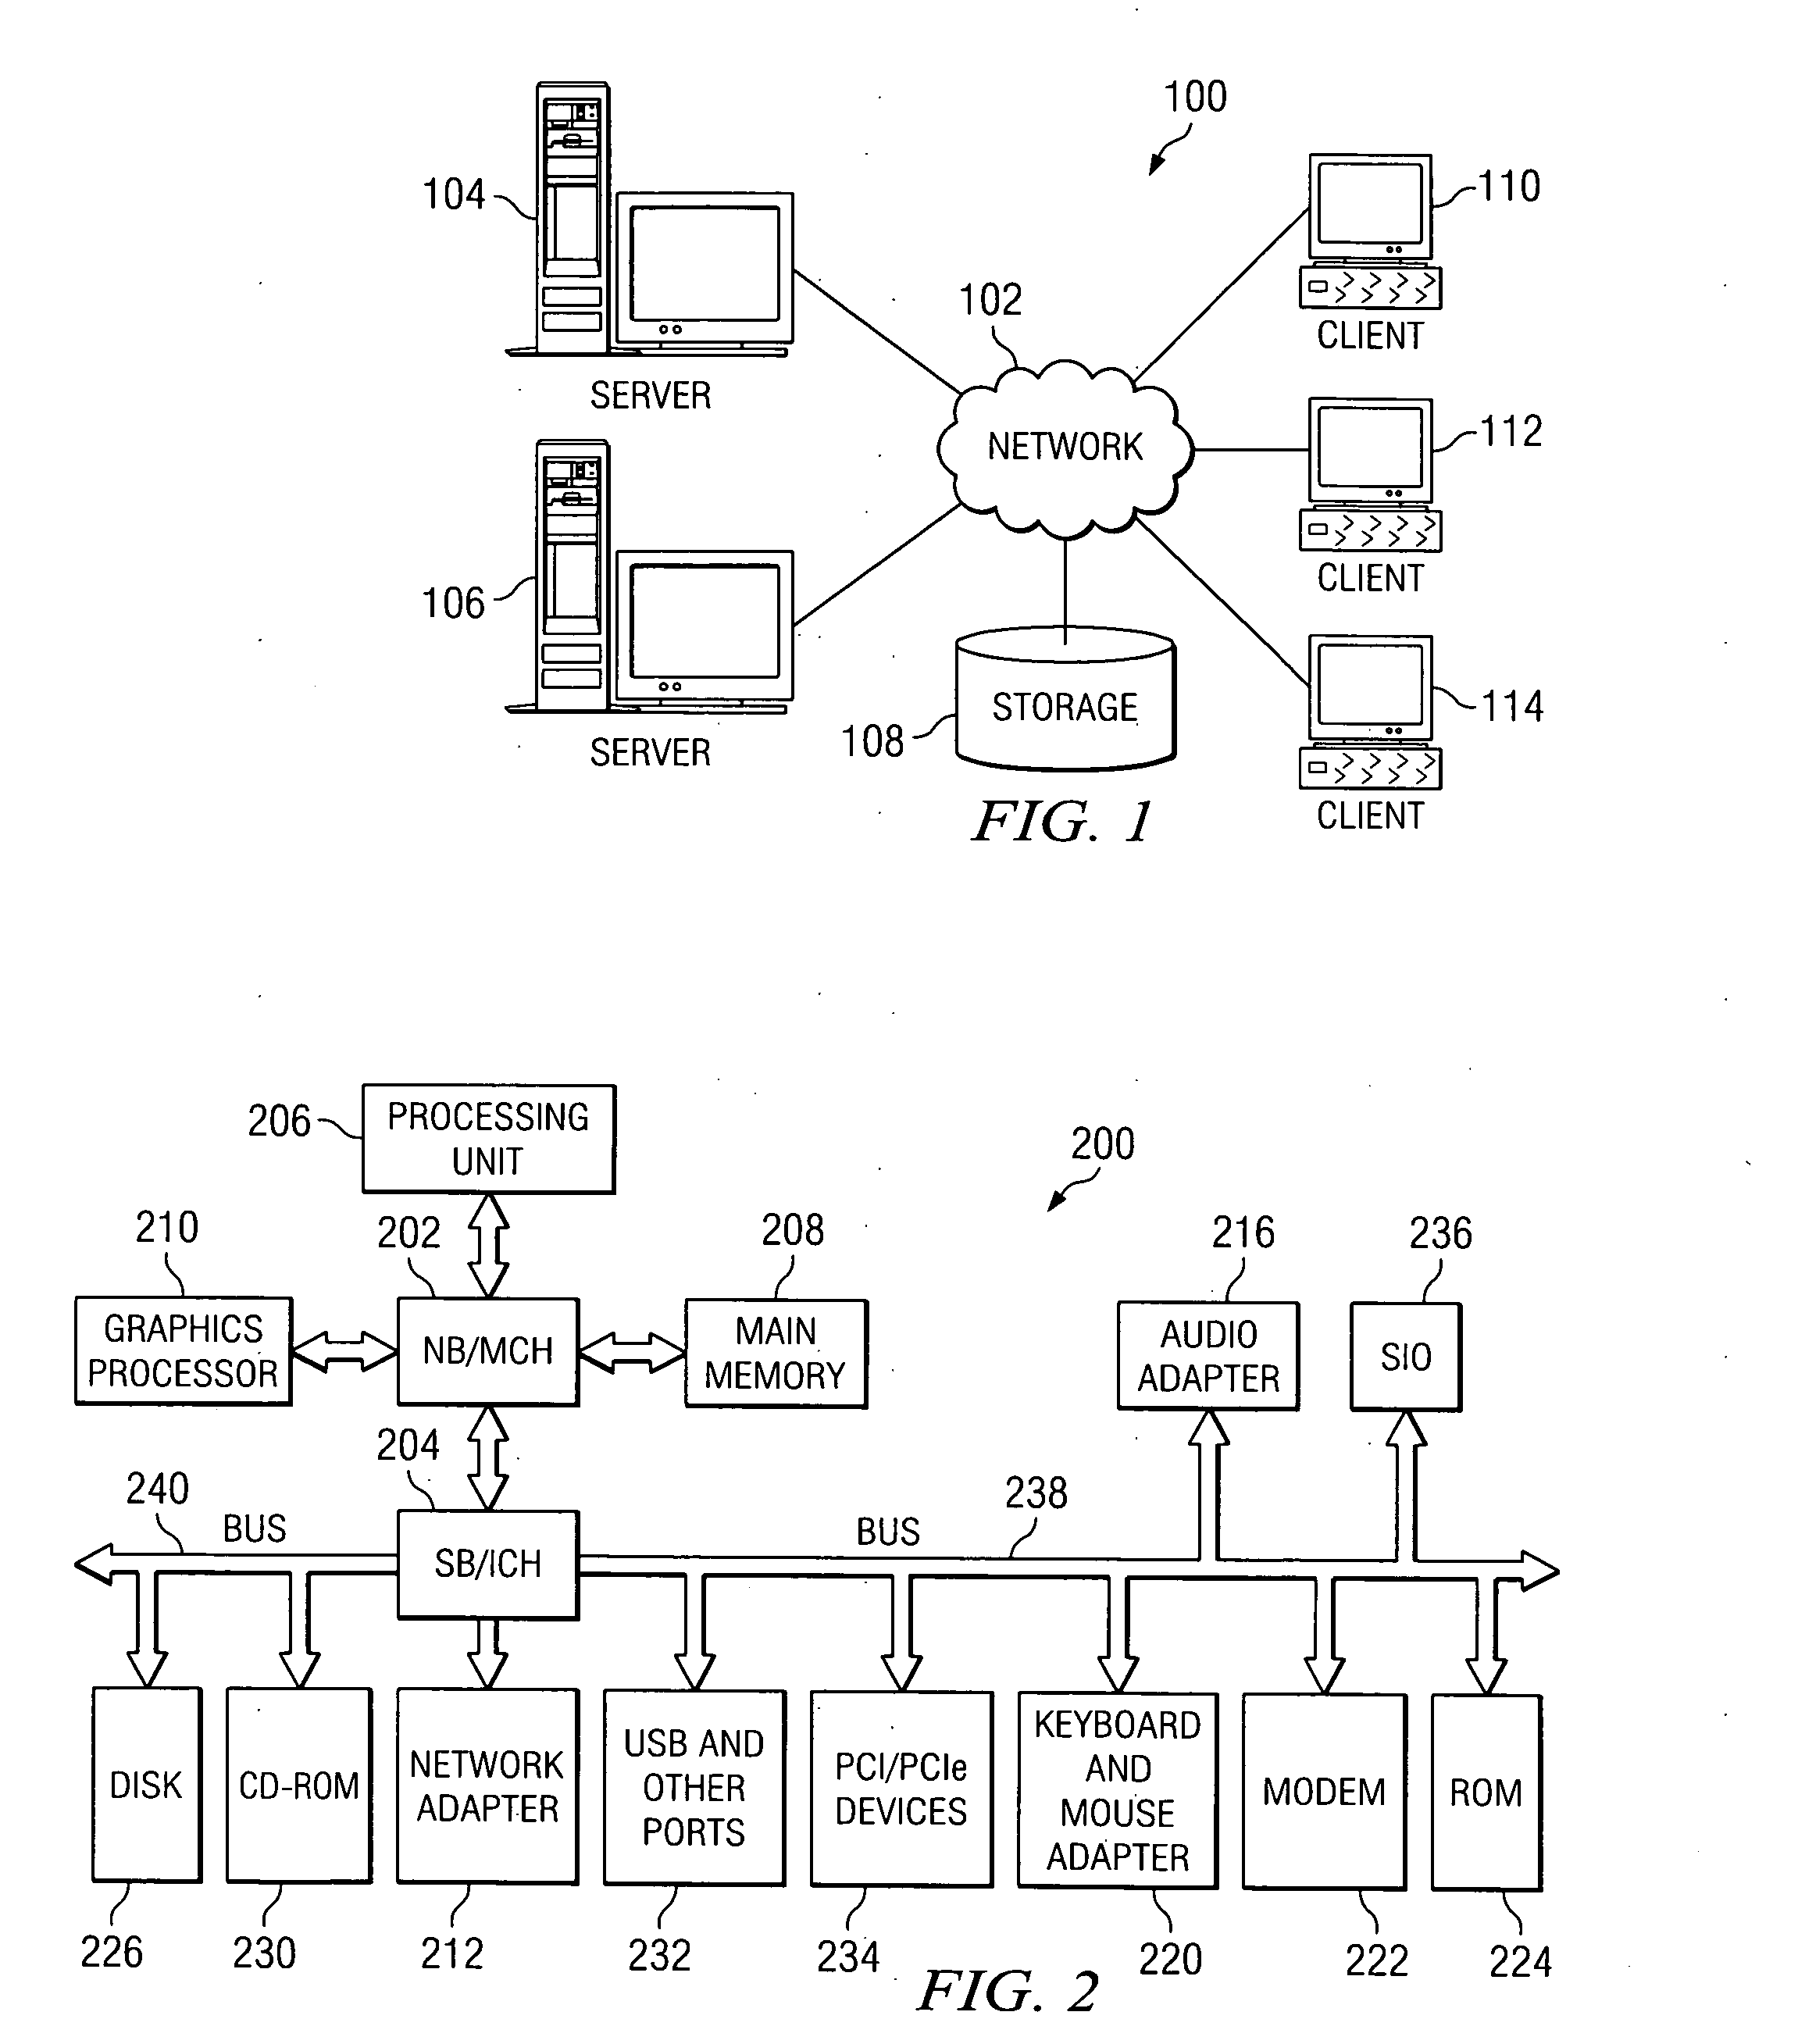 Method and apparatus for collecting data from data sources